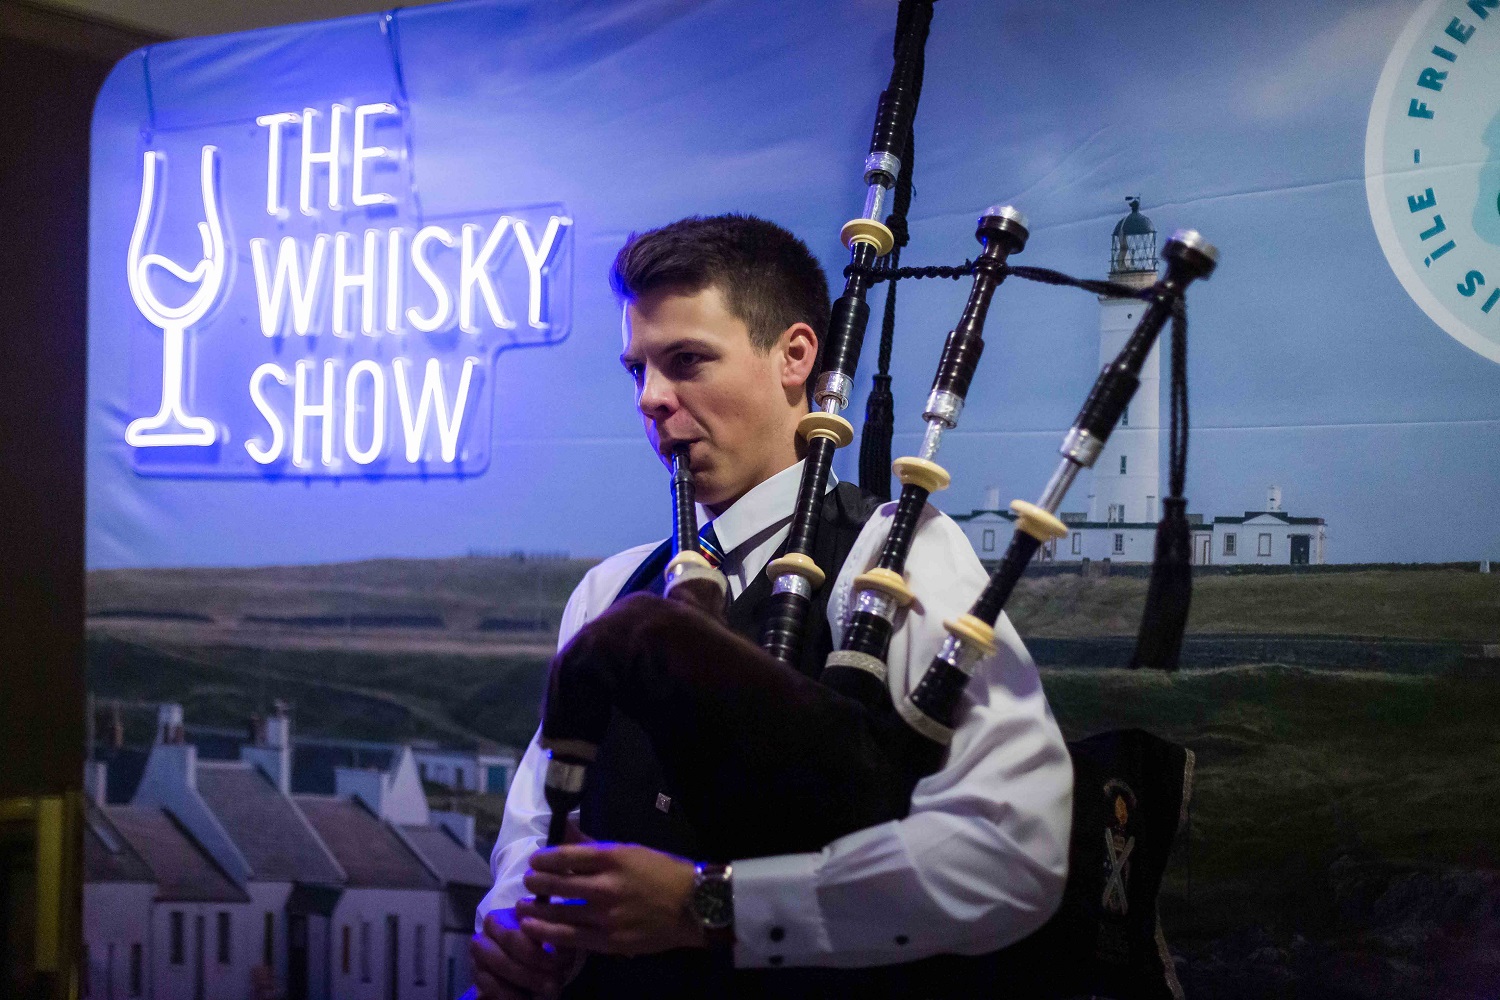 The Whisky List acquires The Whisky Show The Shout